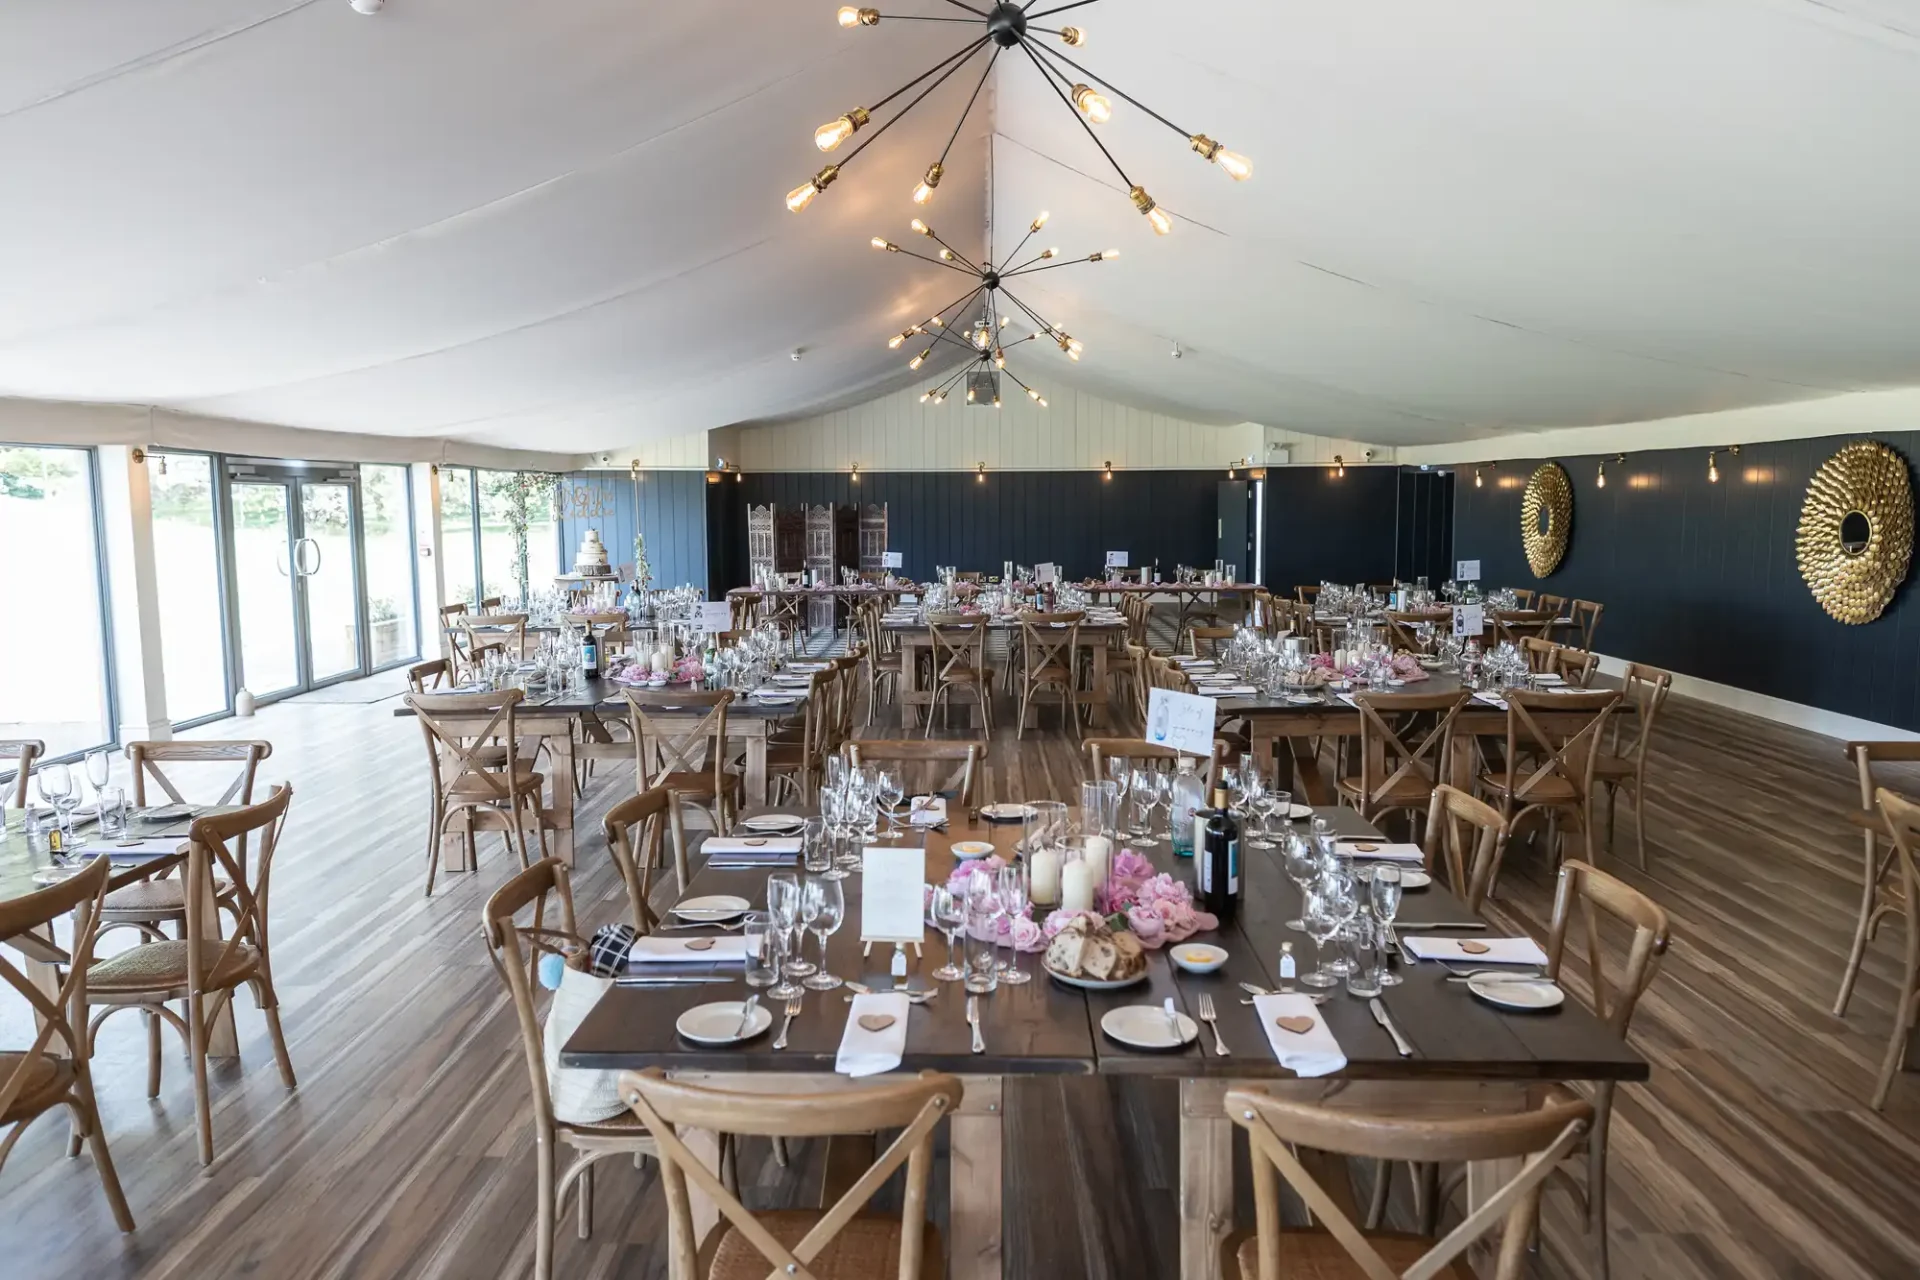 Elegant event venue interior with tables set for a formal dining, featuring wooden chairs and floral centerpieces under a tent with string lights.